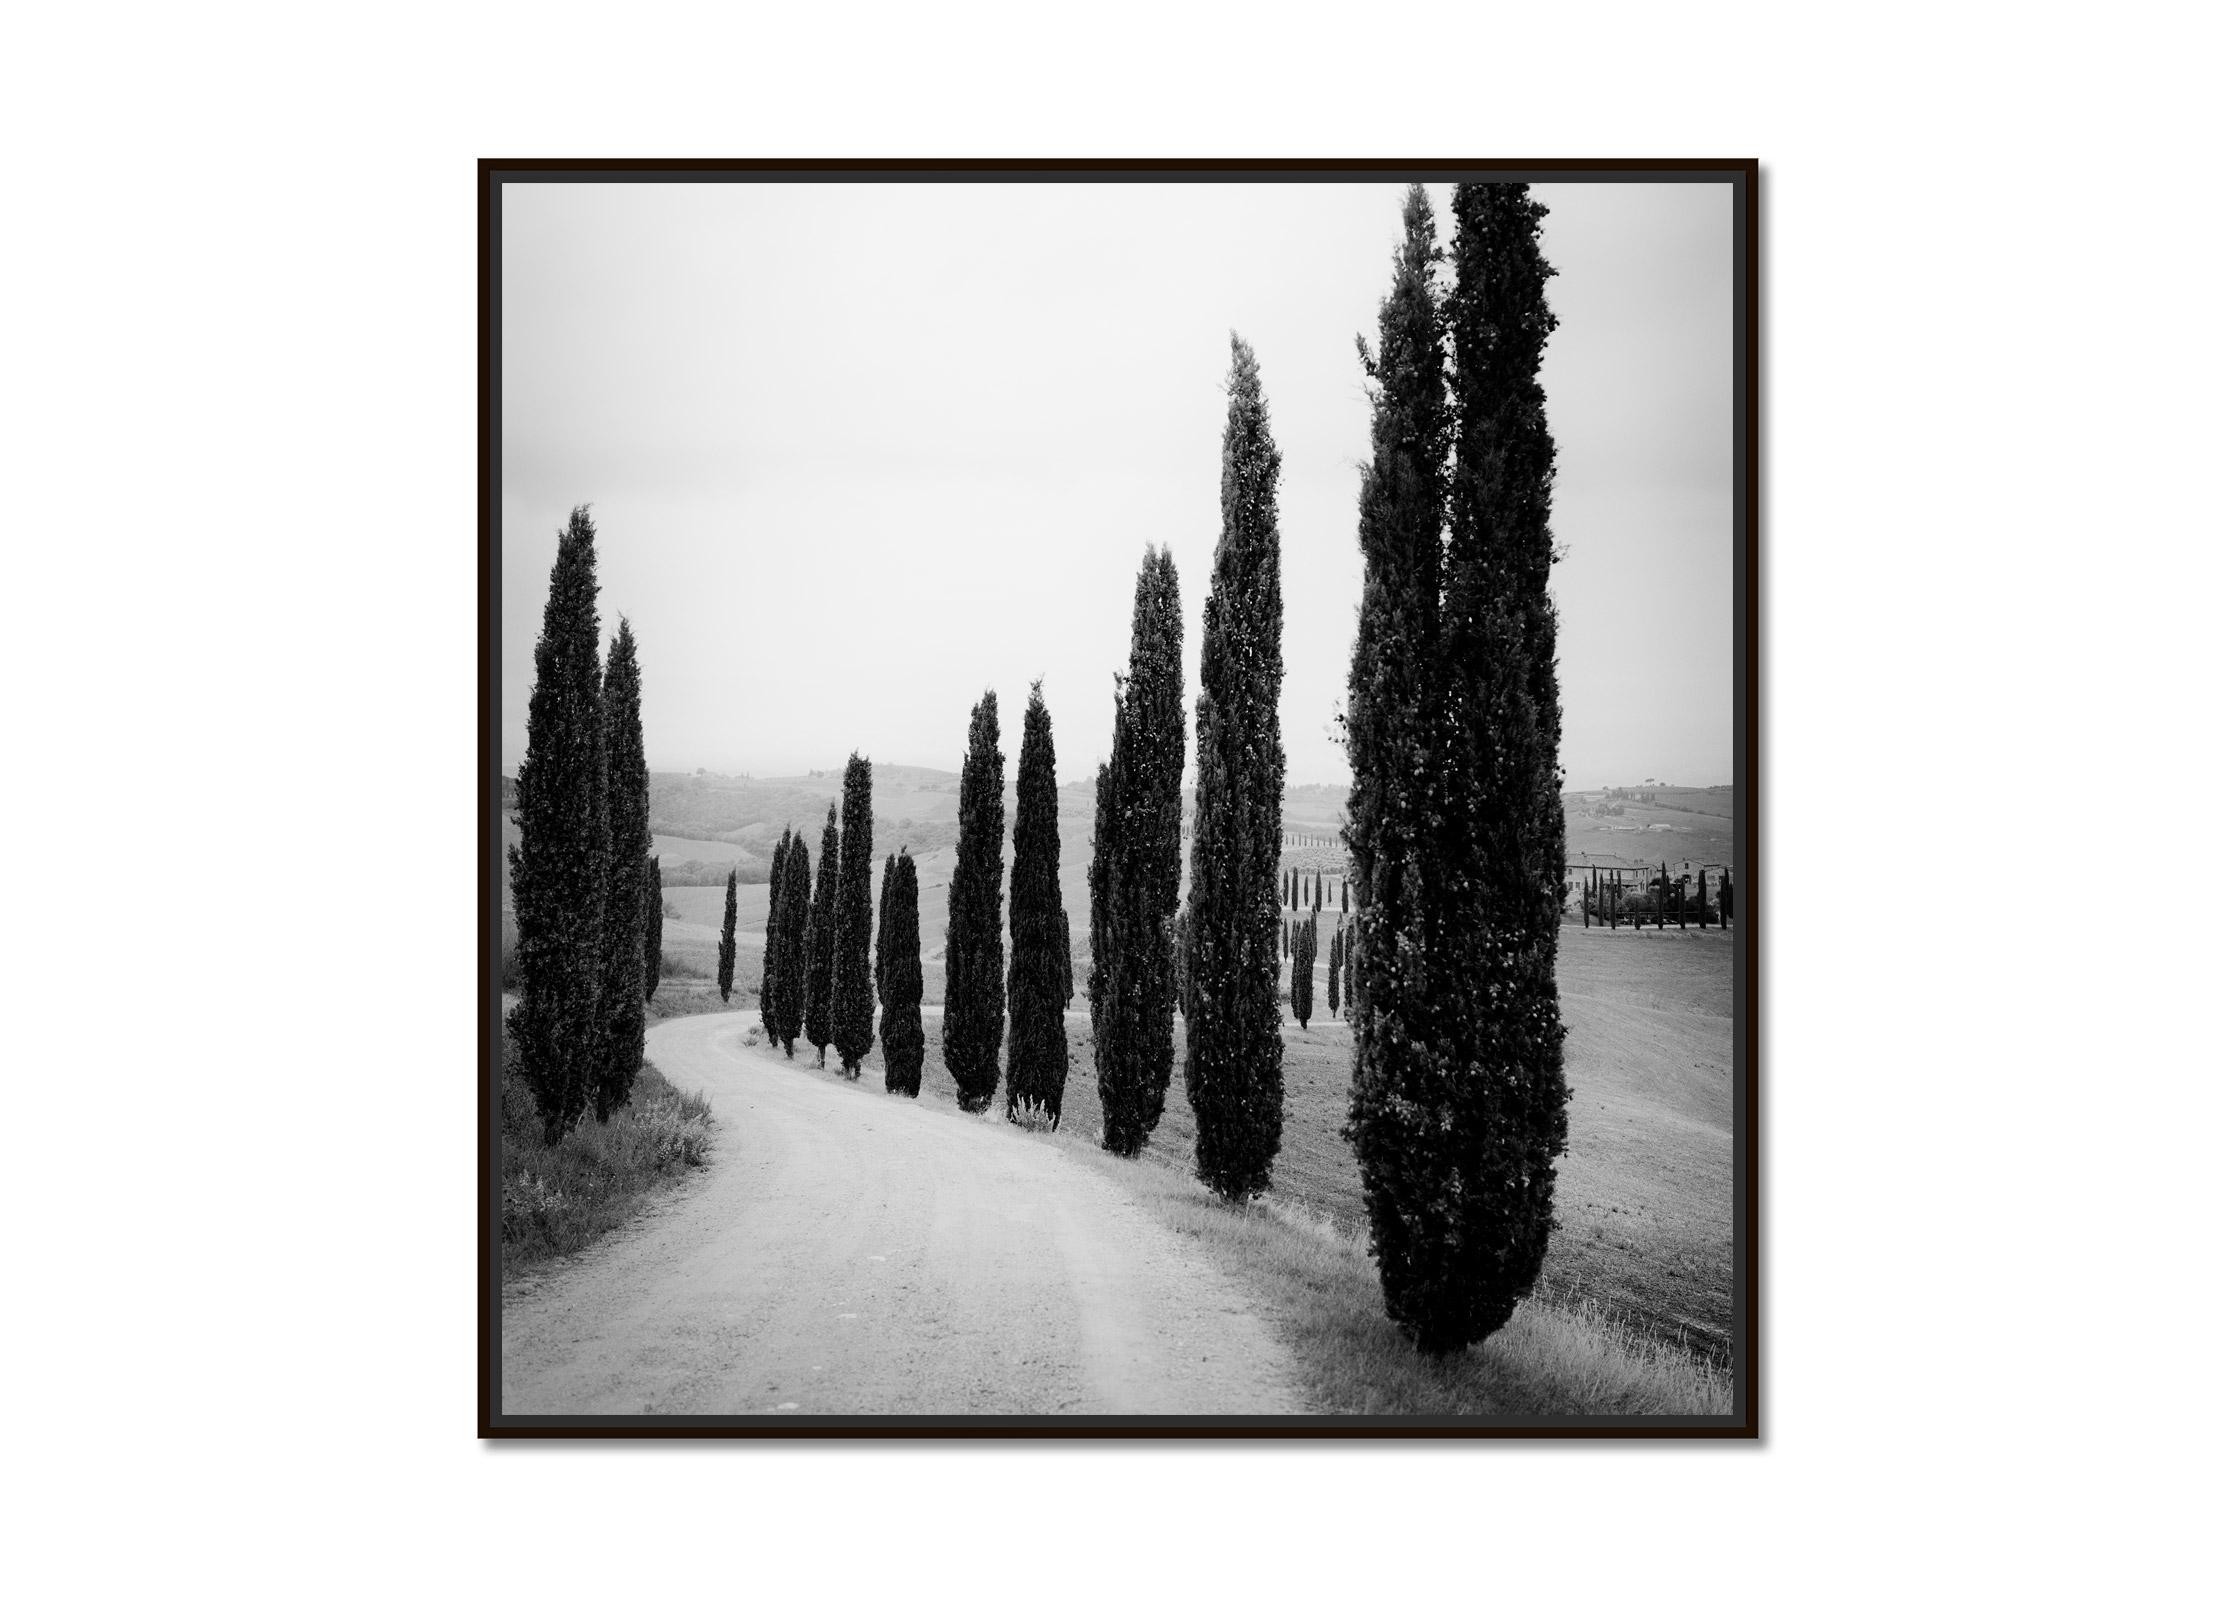 Cypress Trees, along the Road, Tuscany, black and white photography, landscape - Photograph by Gerald Berghammer